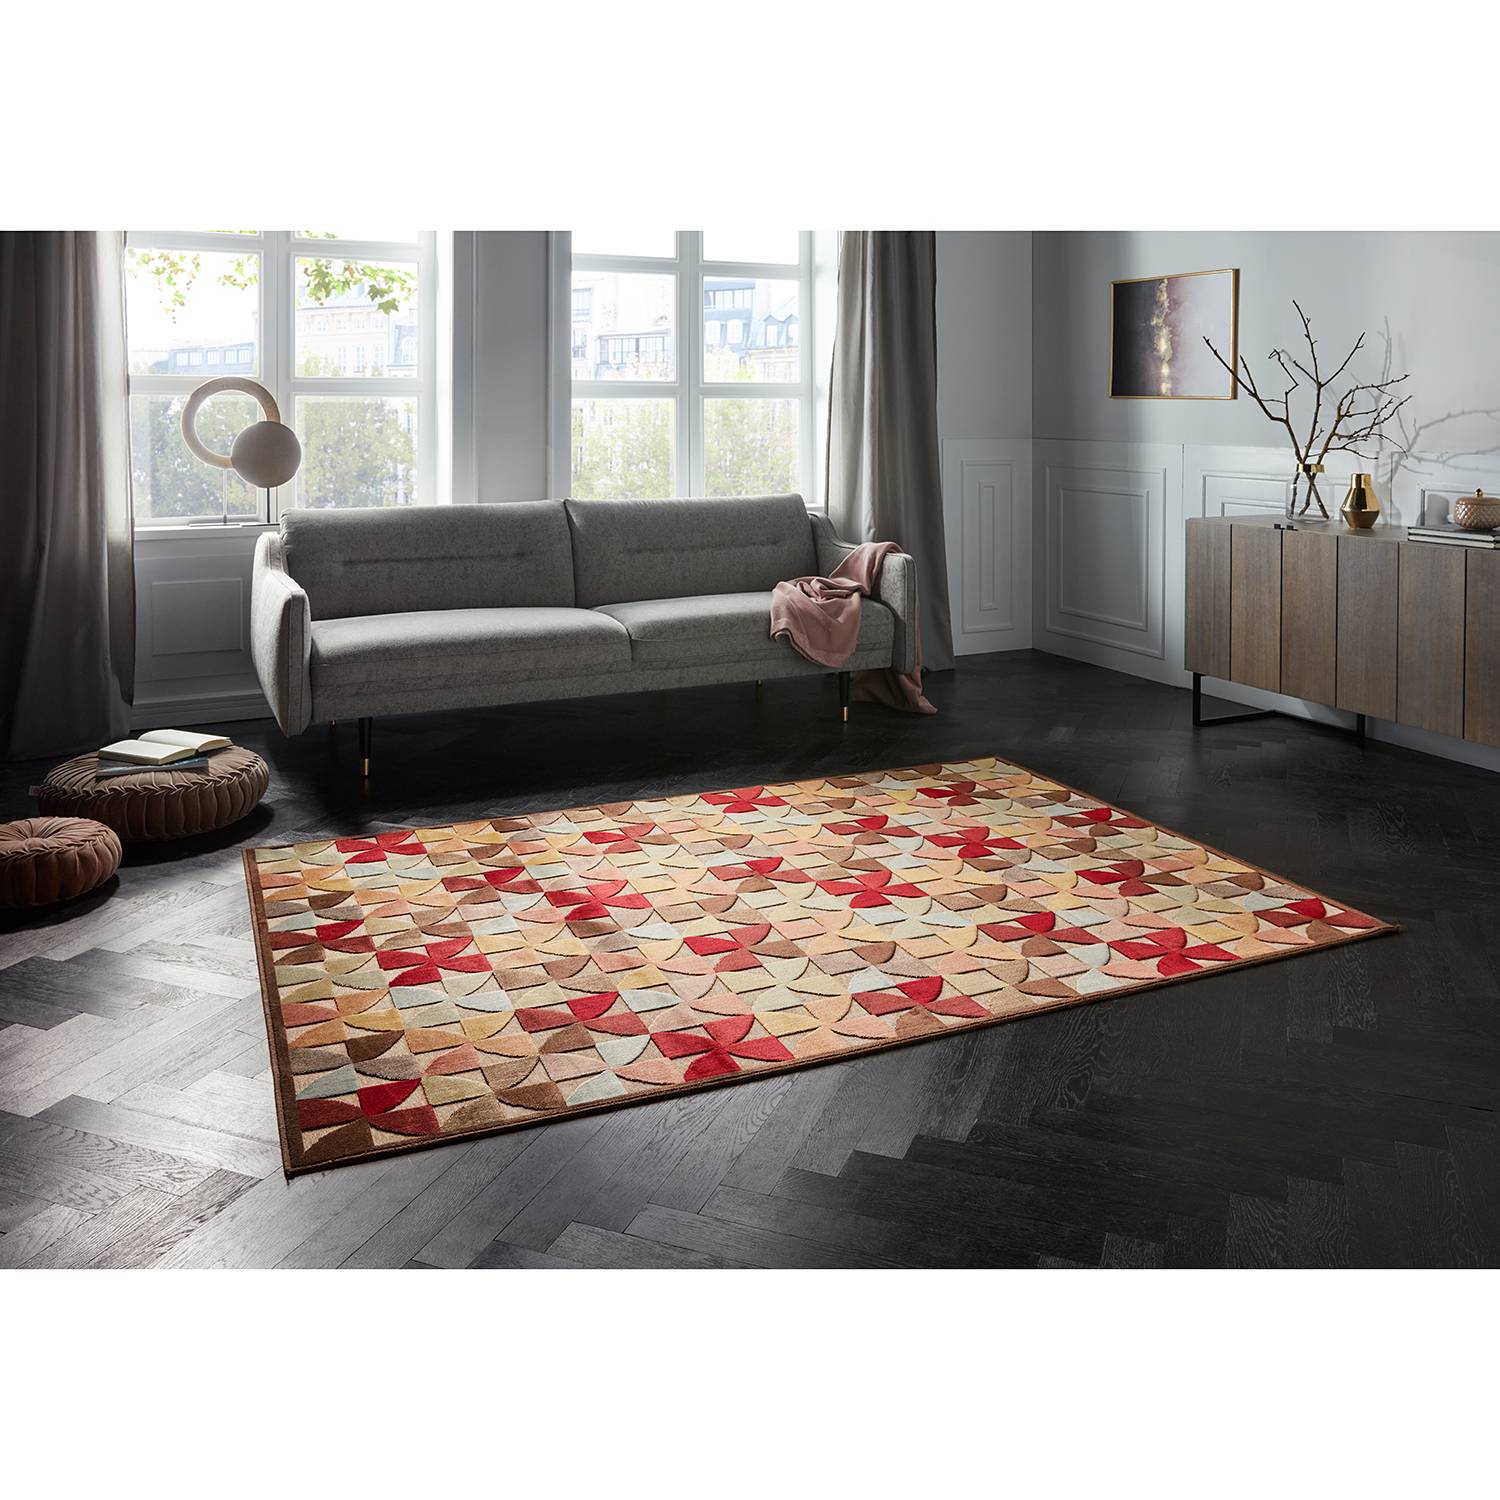 Image of Tapis Ailette 000000001000193693